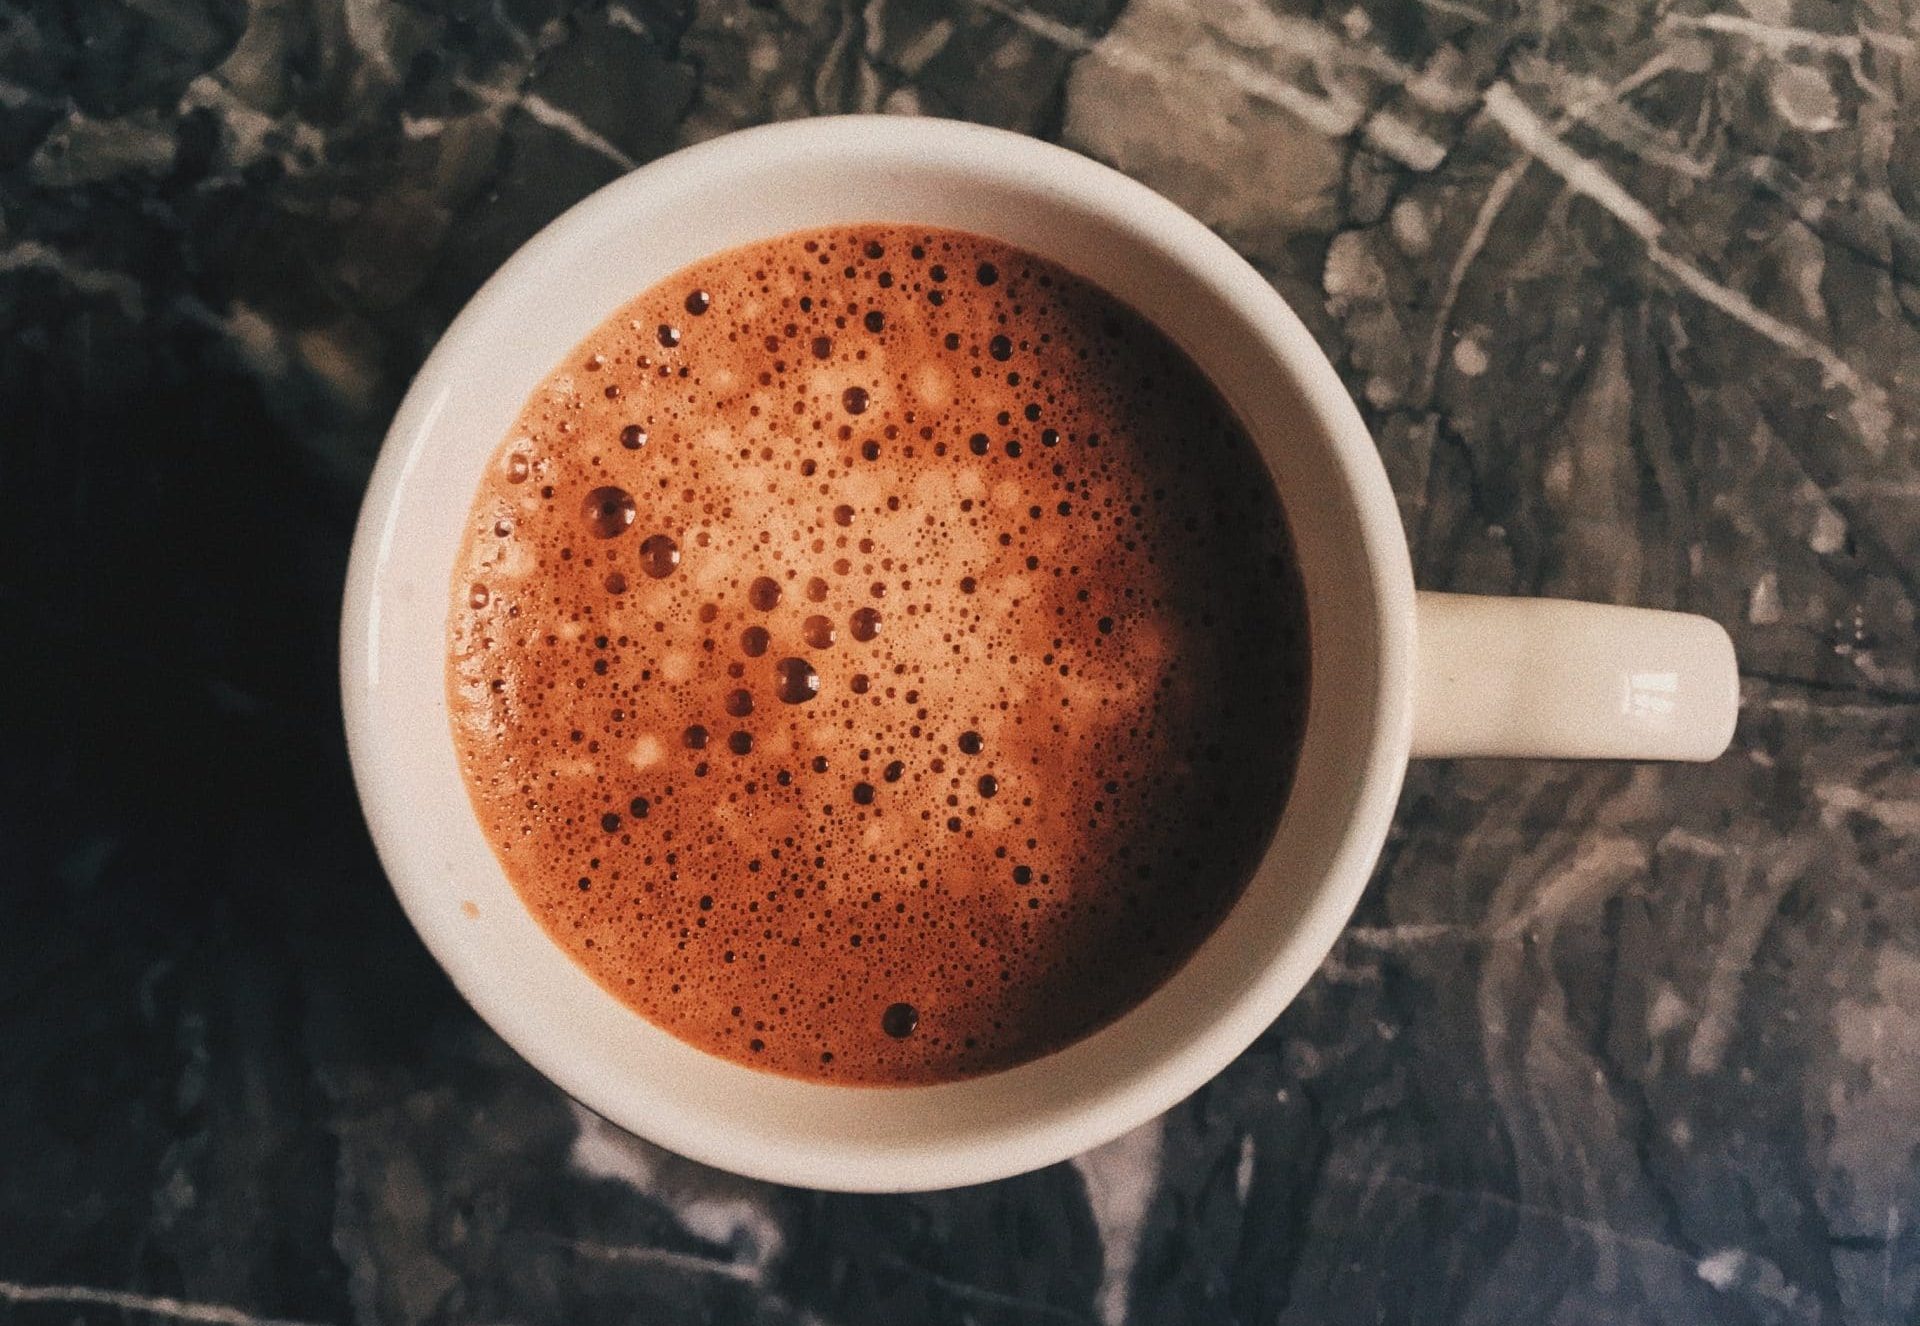 How to prepare ceremonial cacao, warm cacao in a white mug, ready to drink and enjoy.